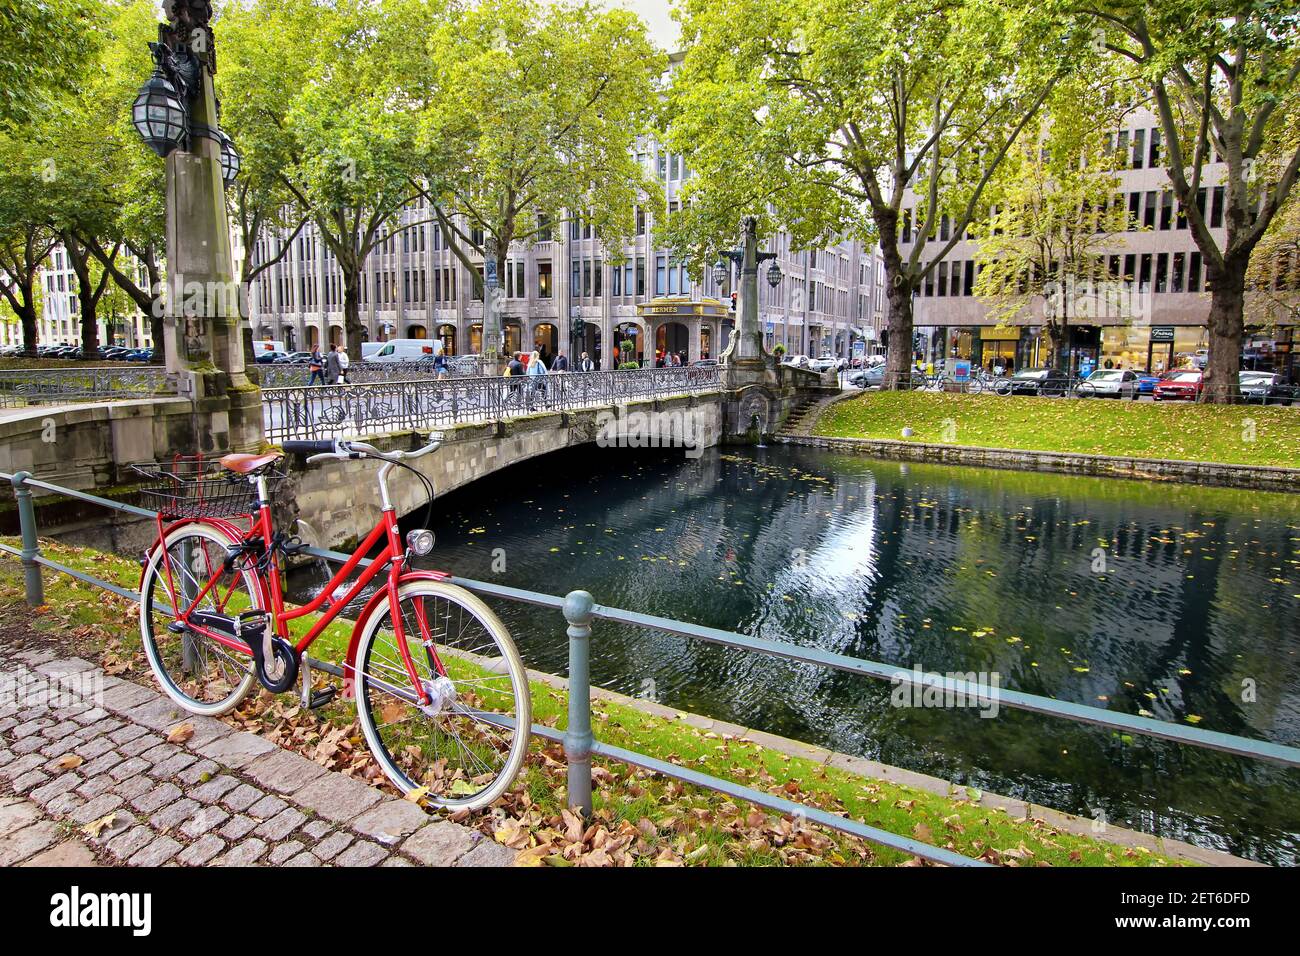 Königsallee is not only a famous shopping boulevard, but also has wonderful green areas. Romantic scenery with red bike at the city canal 'Kö-Graben'. Stock Photo